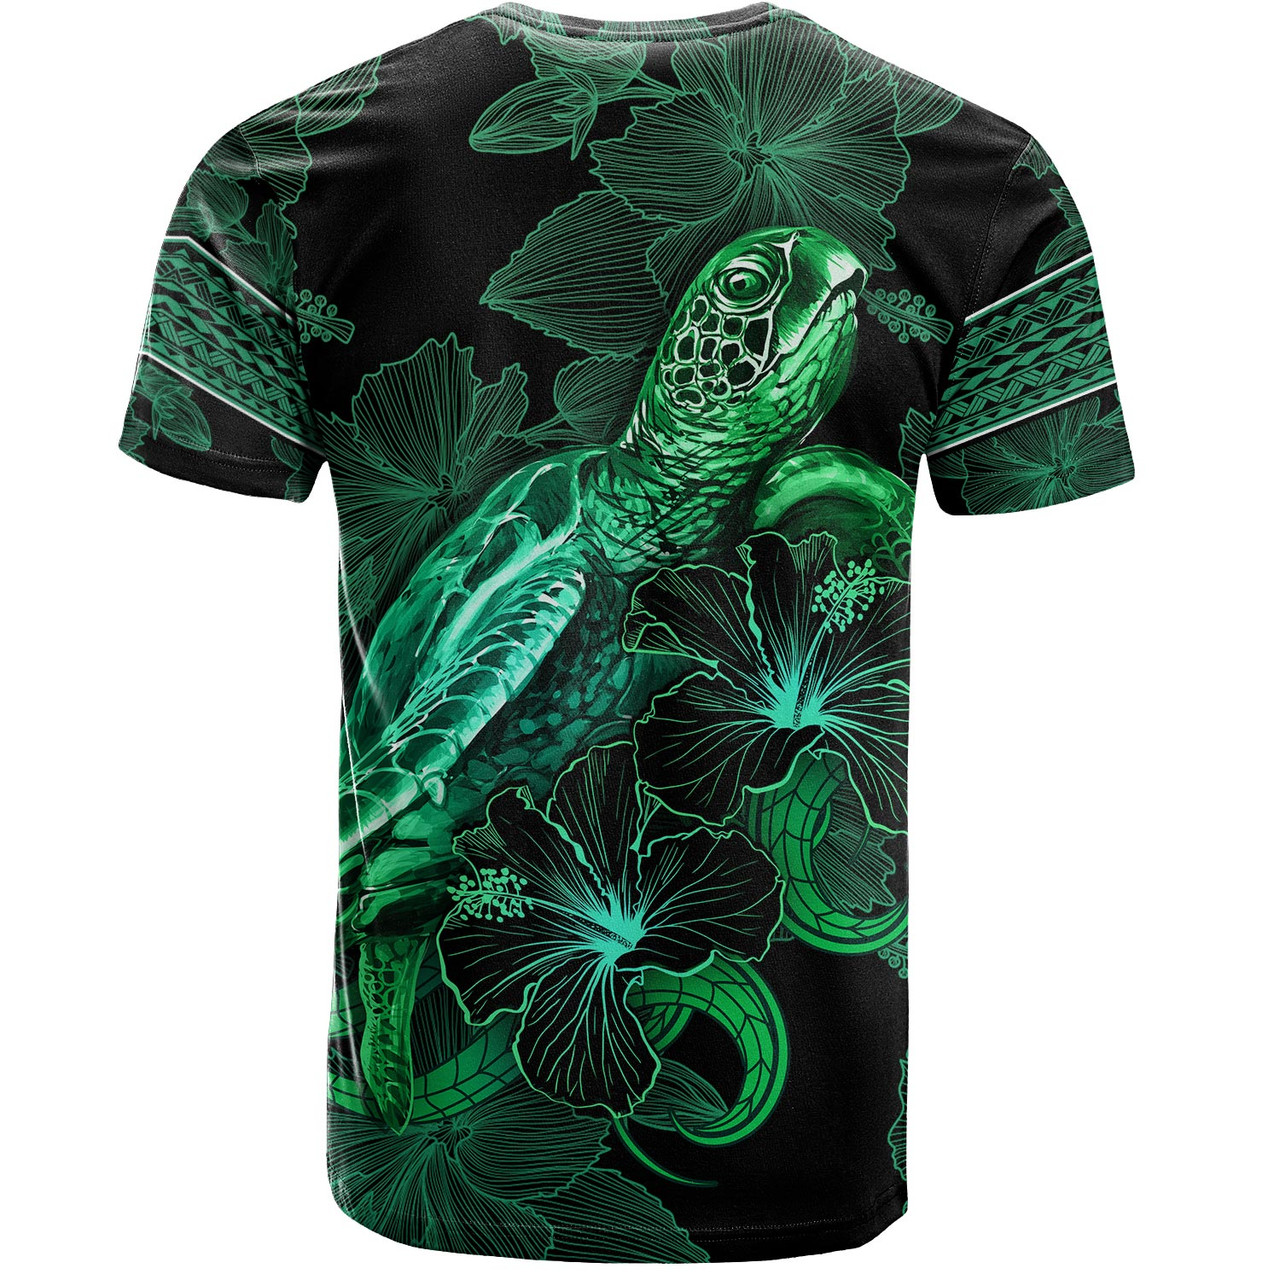 Papua New Guinea T-Shirt  Sea Turtle With Blooming Hibiscus Flowers Tribal Green